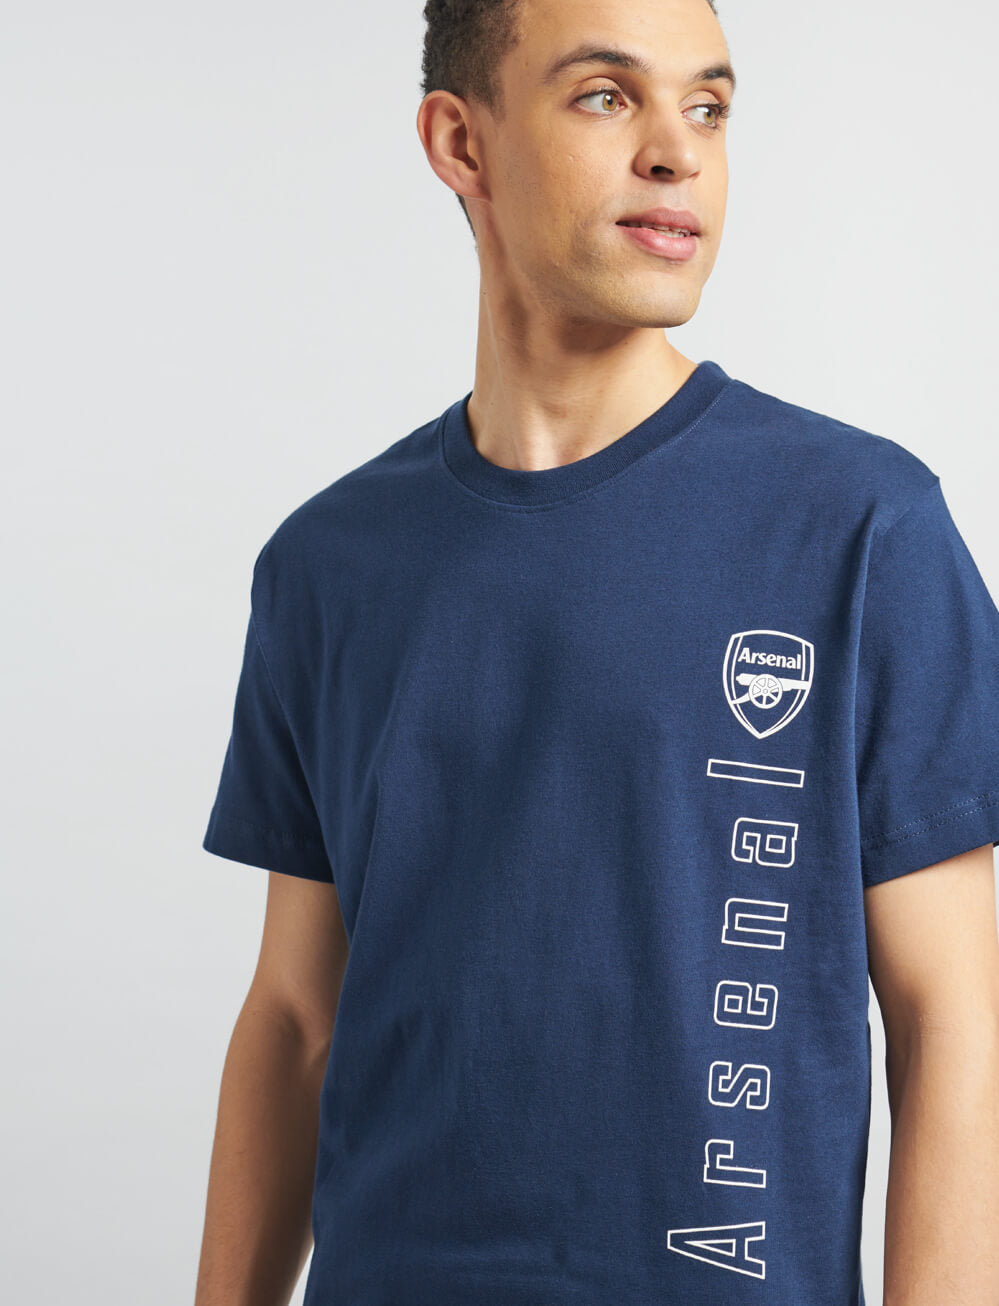 Official Arsenal Graphic T-Shirt - Navy - The World Football Store